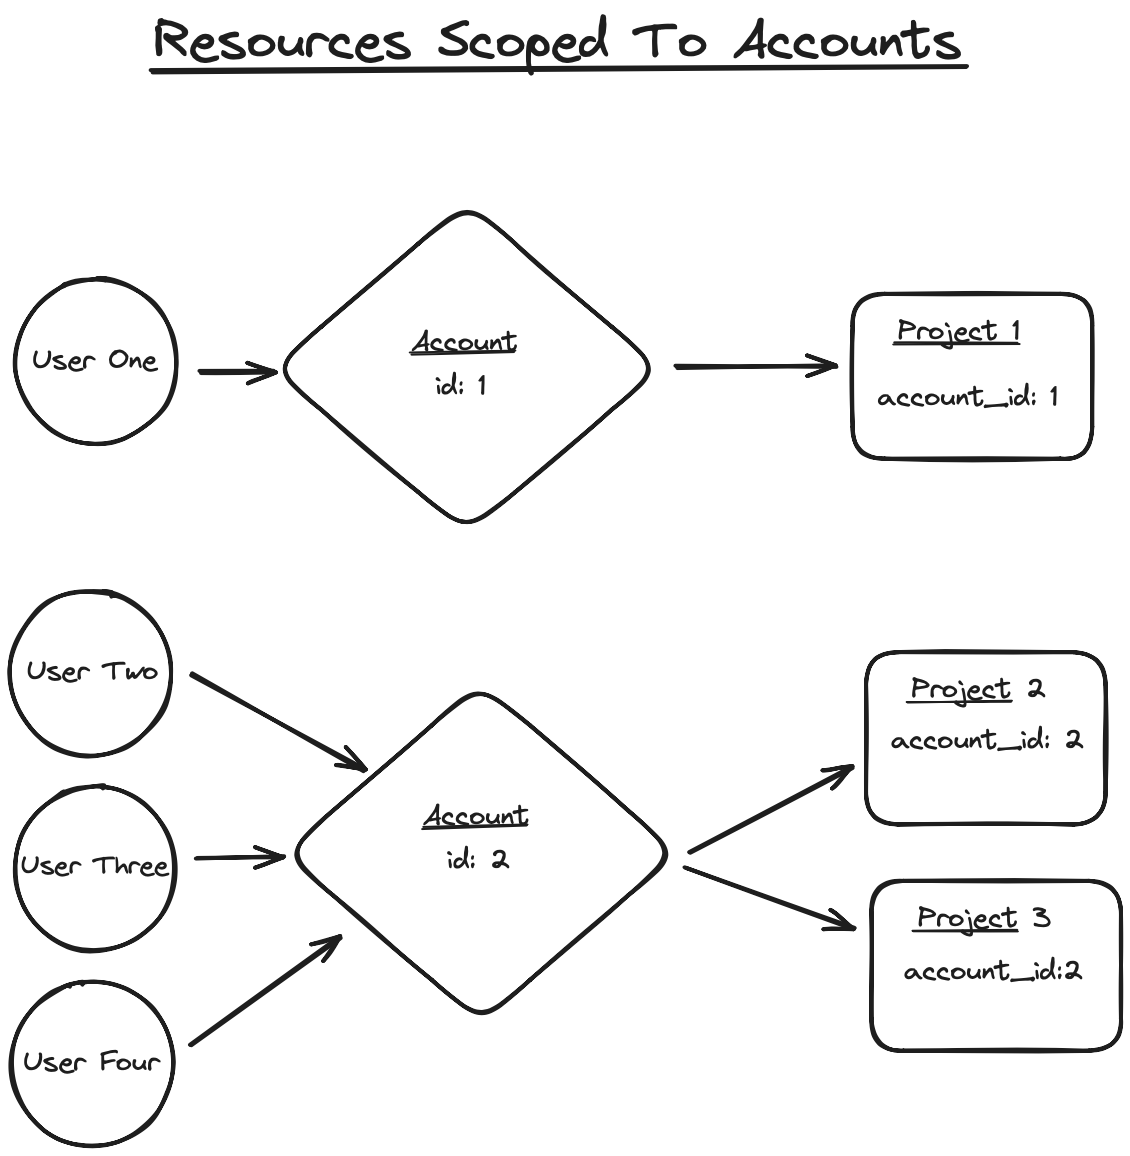 Diagram of how resources are scoped to accounts in Jumpstart Pro